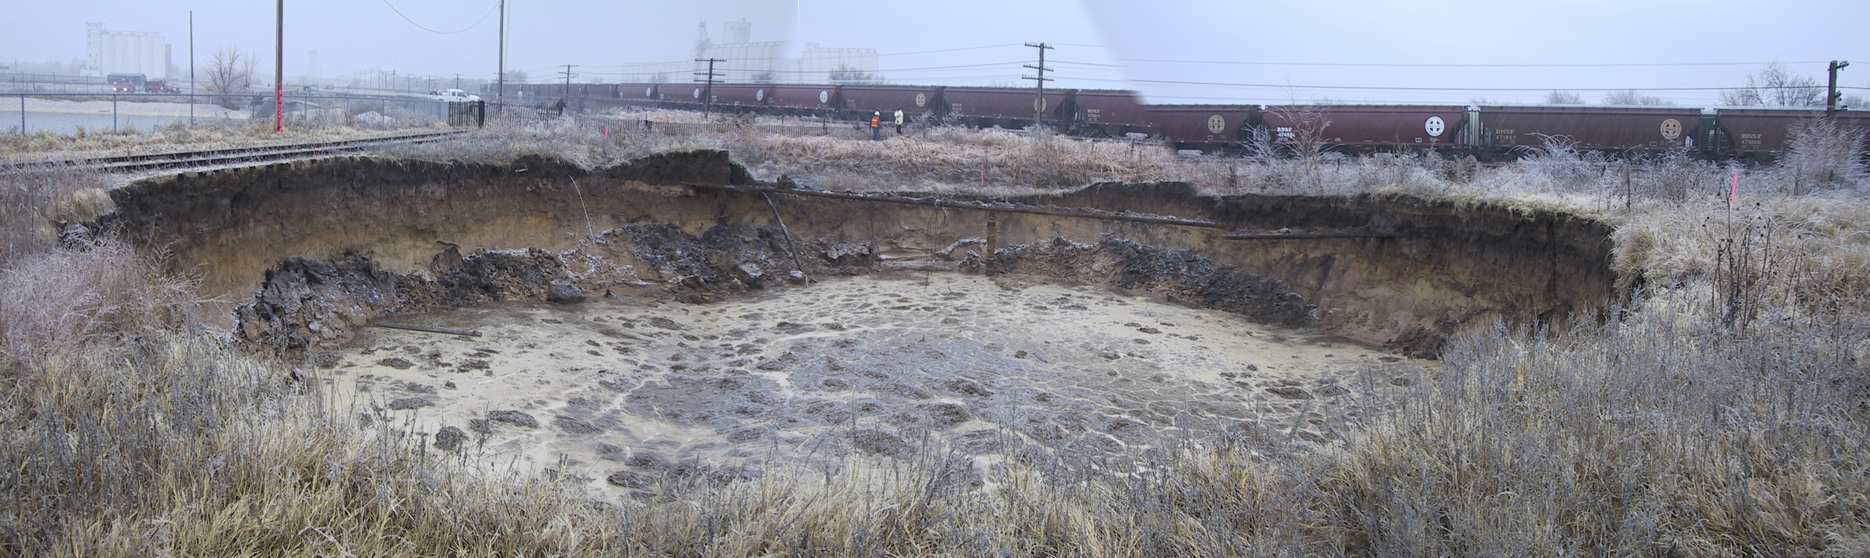 photo of sinkhole; about 115 feet in diameter and 20 feet deep; railroad tracks to left and behind hole are very close; train moving on far tracks